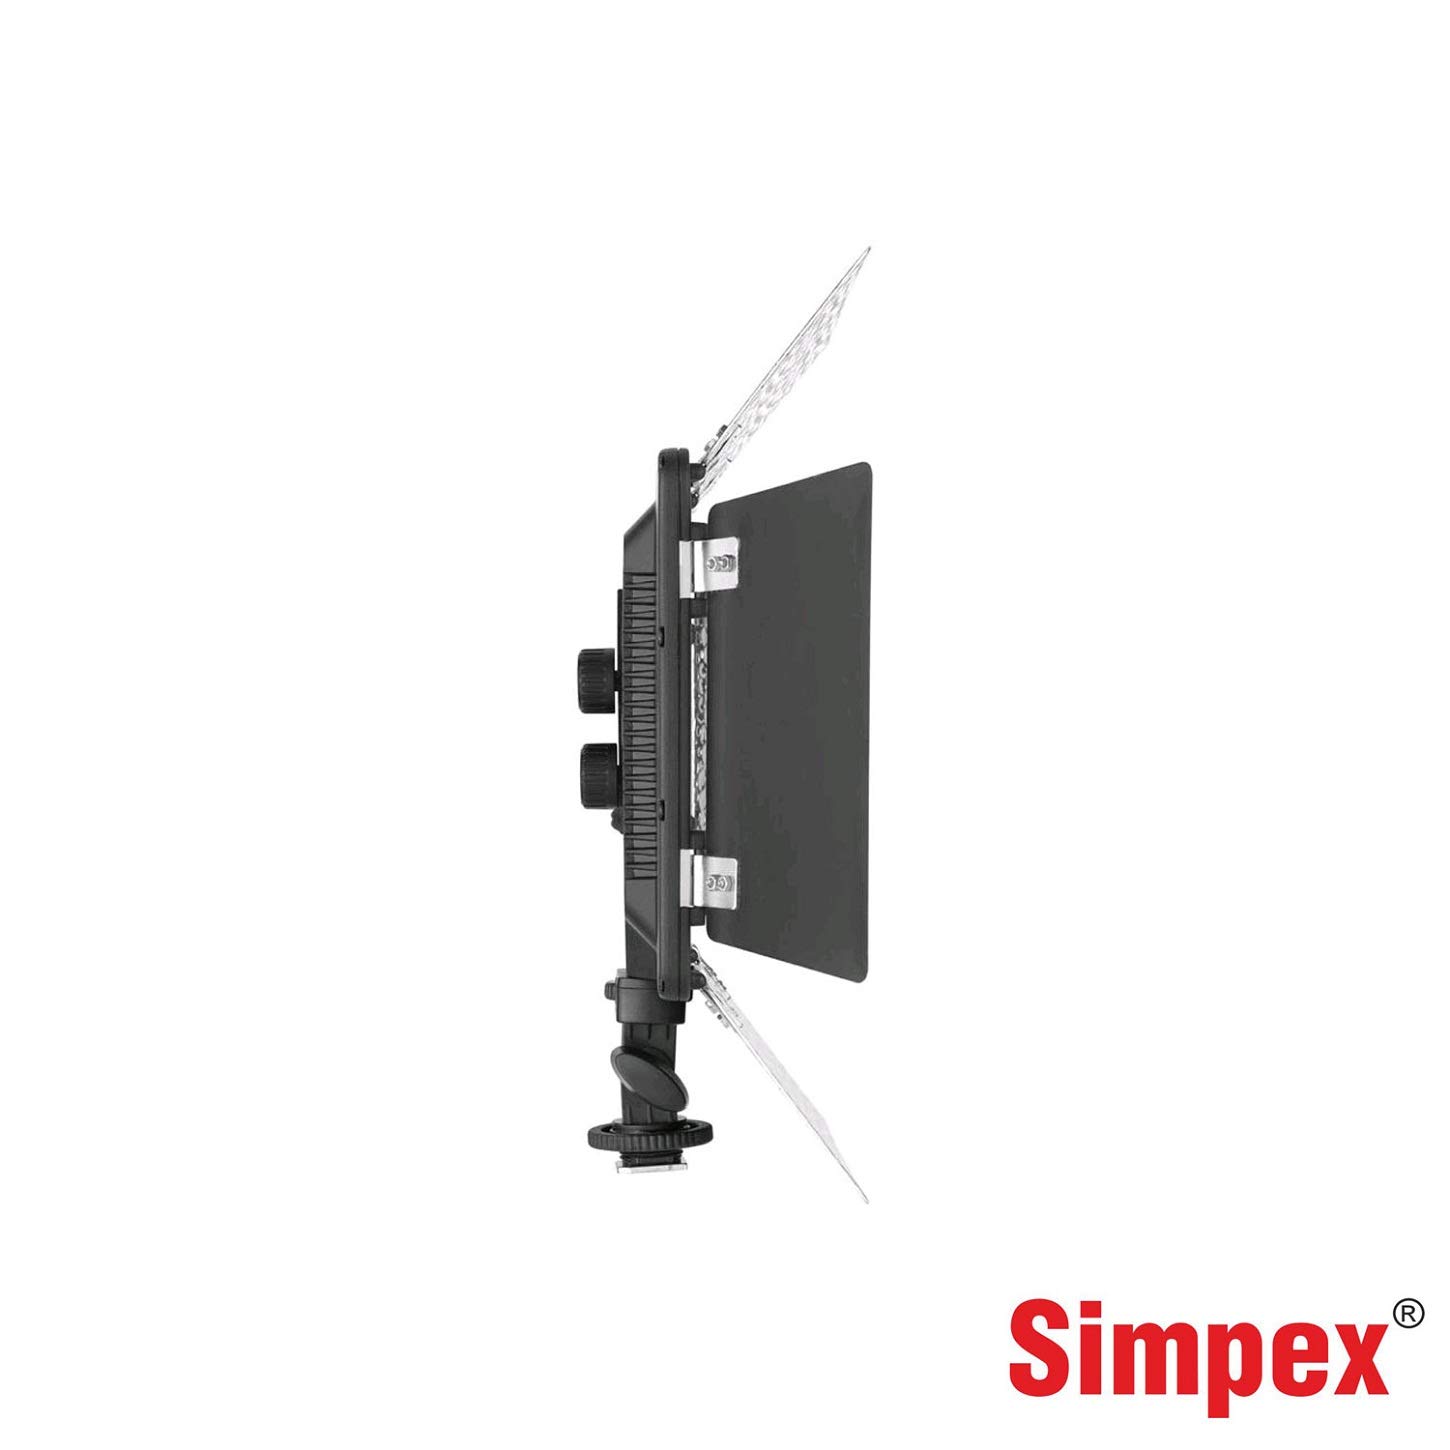 Simpex LED 720 with Barndoor – Professional Ultra Slim, Dual Color LED Video Light with Battery and Charger